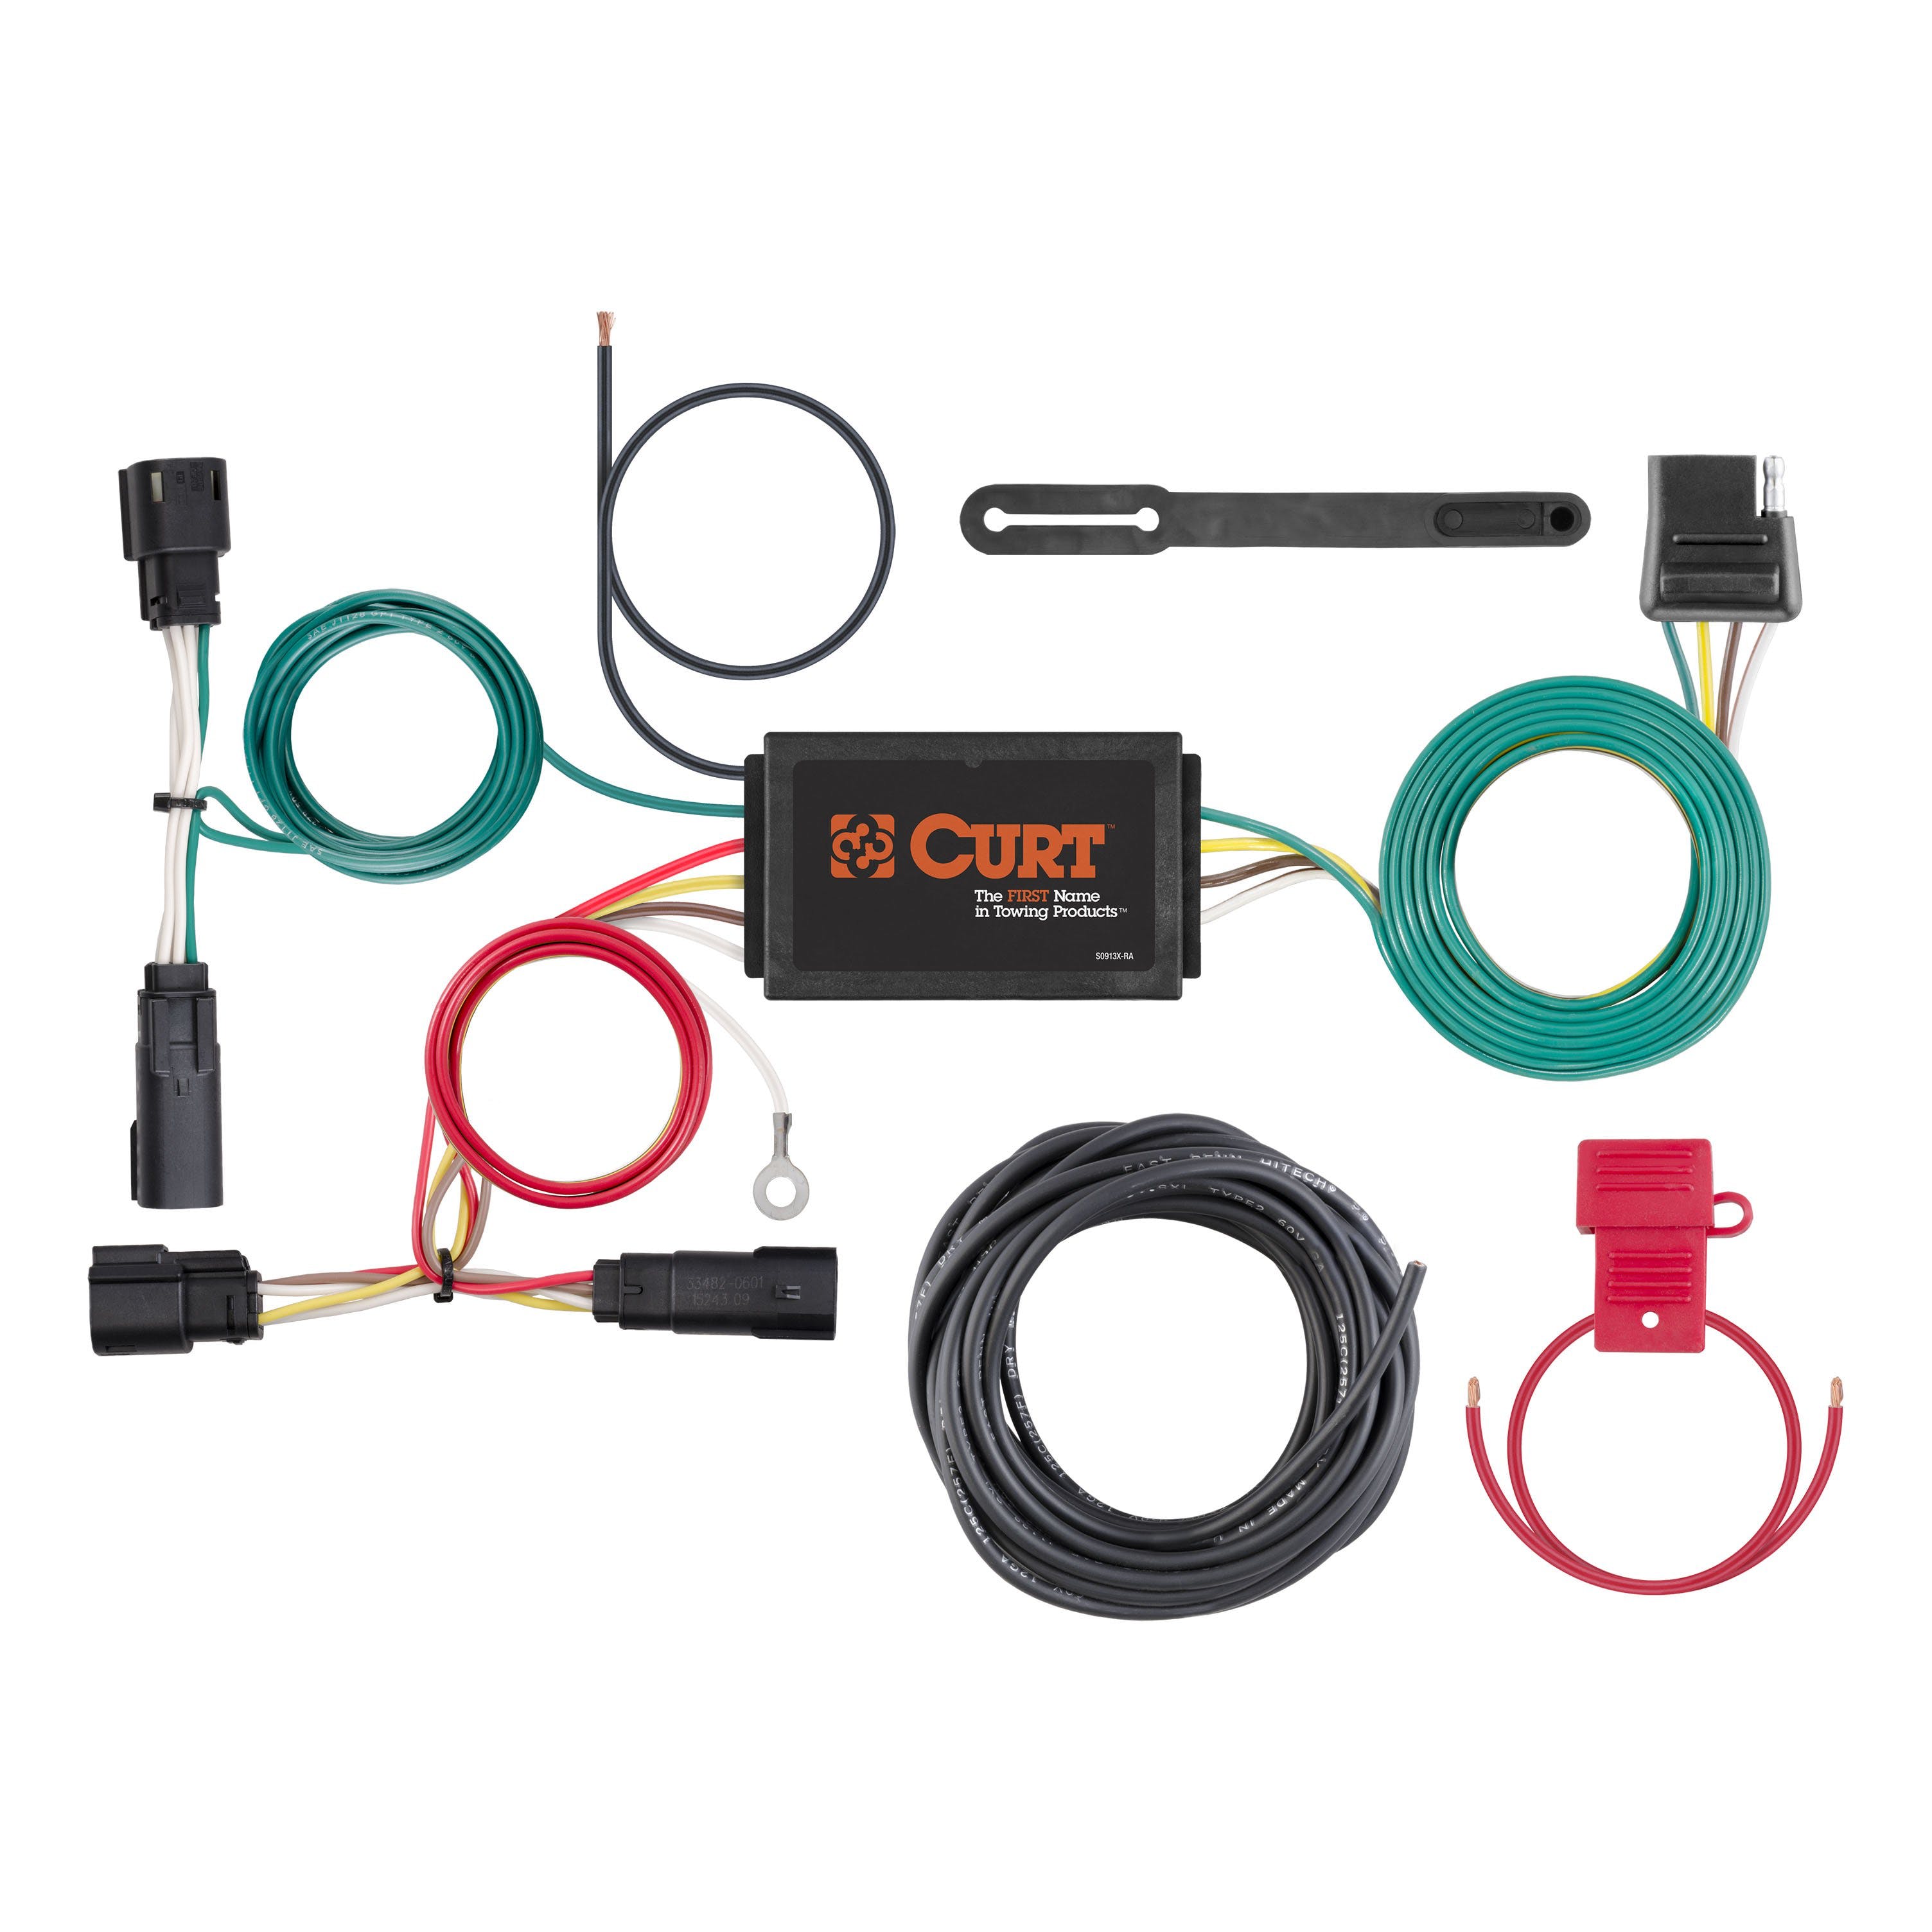 CURT 56320 Custom Wiring Harness, 4-Way Flat Output, Select Ford Escape